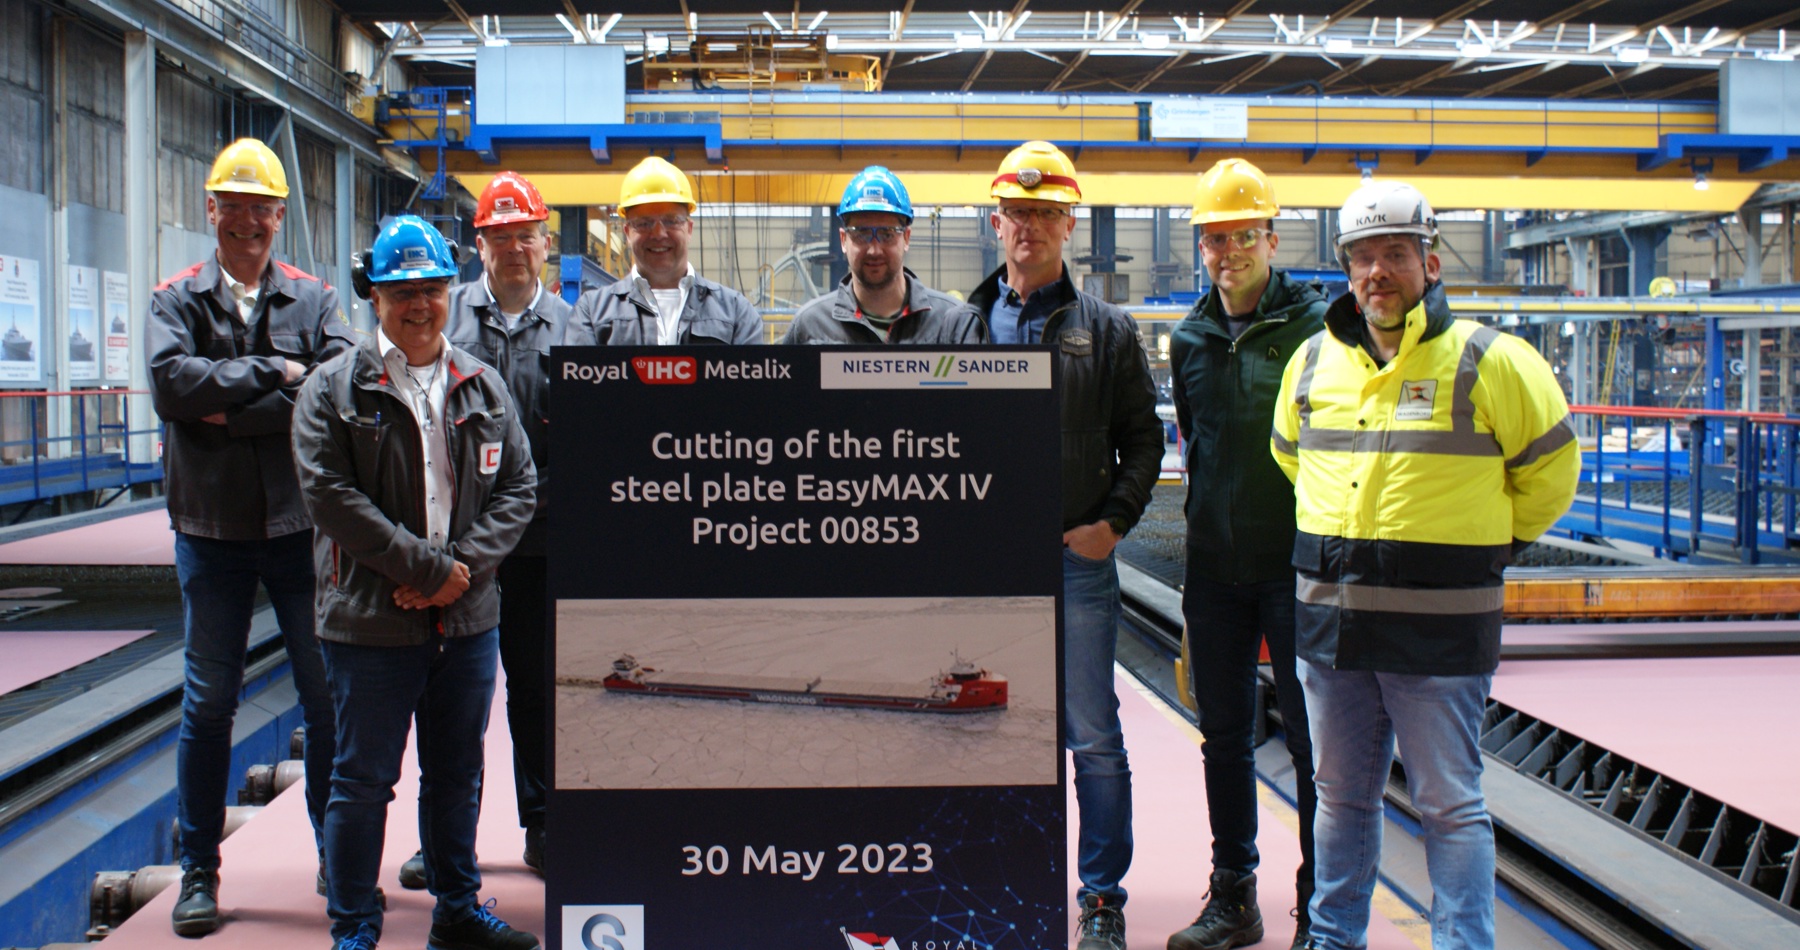 EasyMax 4 Construction Launches with Steel Cutting Ceremony